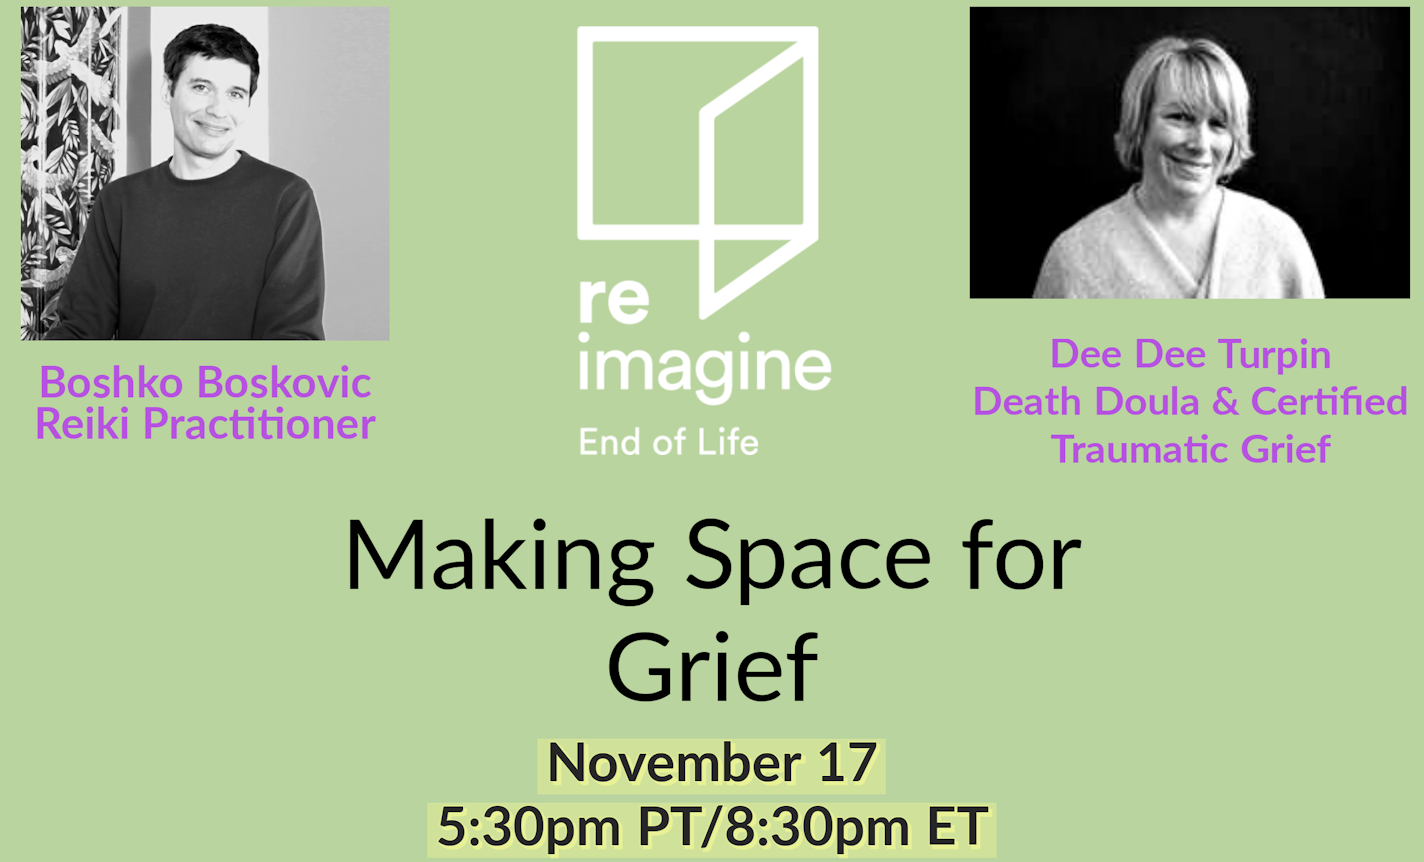 Making Space for Grief: Sorrow, Growth, Action and HOPE